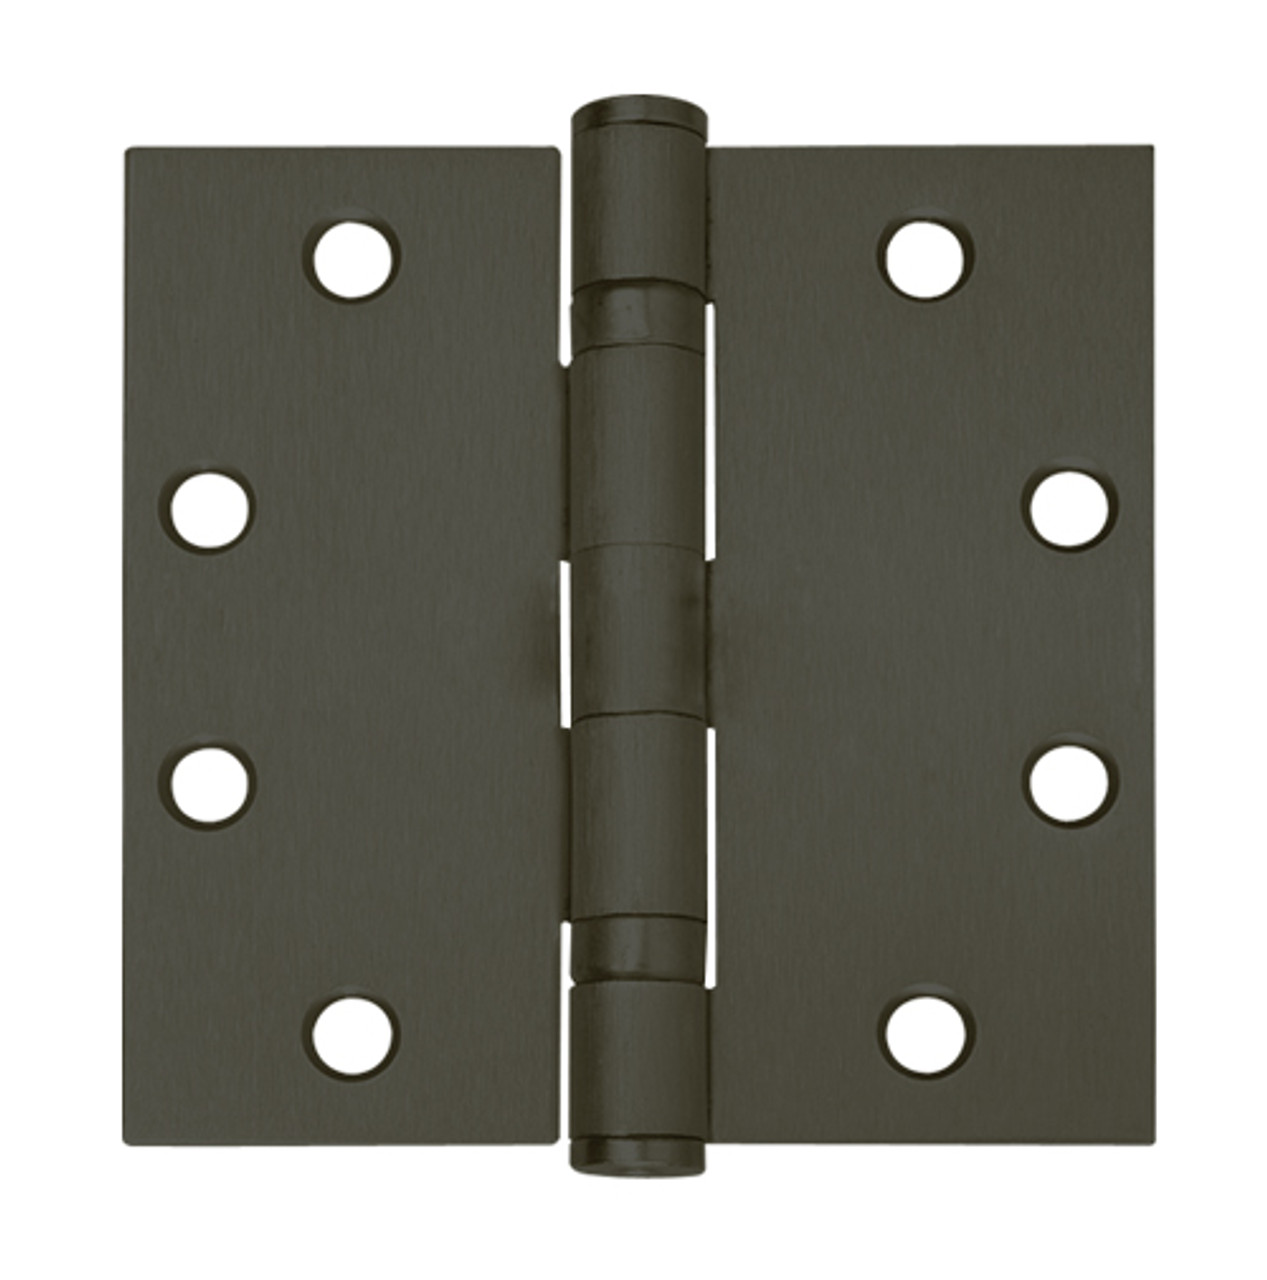 5BB1-4-5x4-641-TW4 IVES 5 Knuckle Ball Bearing Full Mortise Hinge with Electric Thru-Wire in Oxidized Satin Bronze